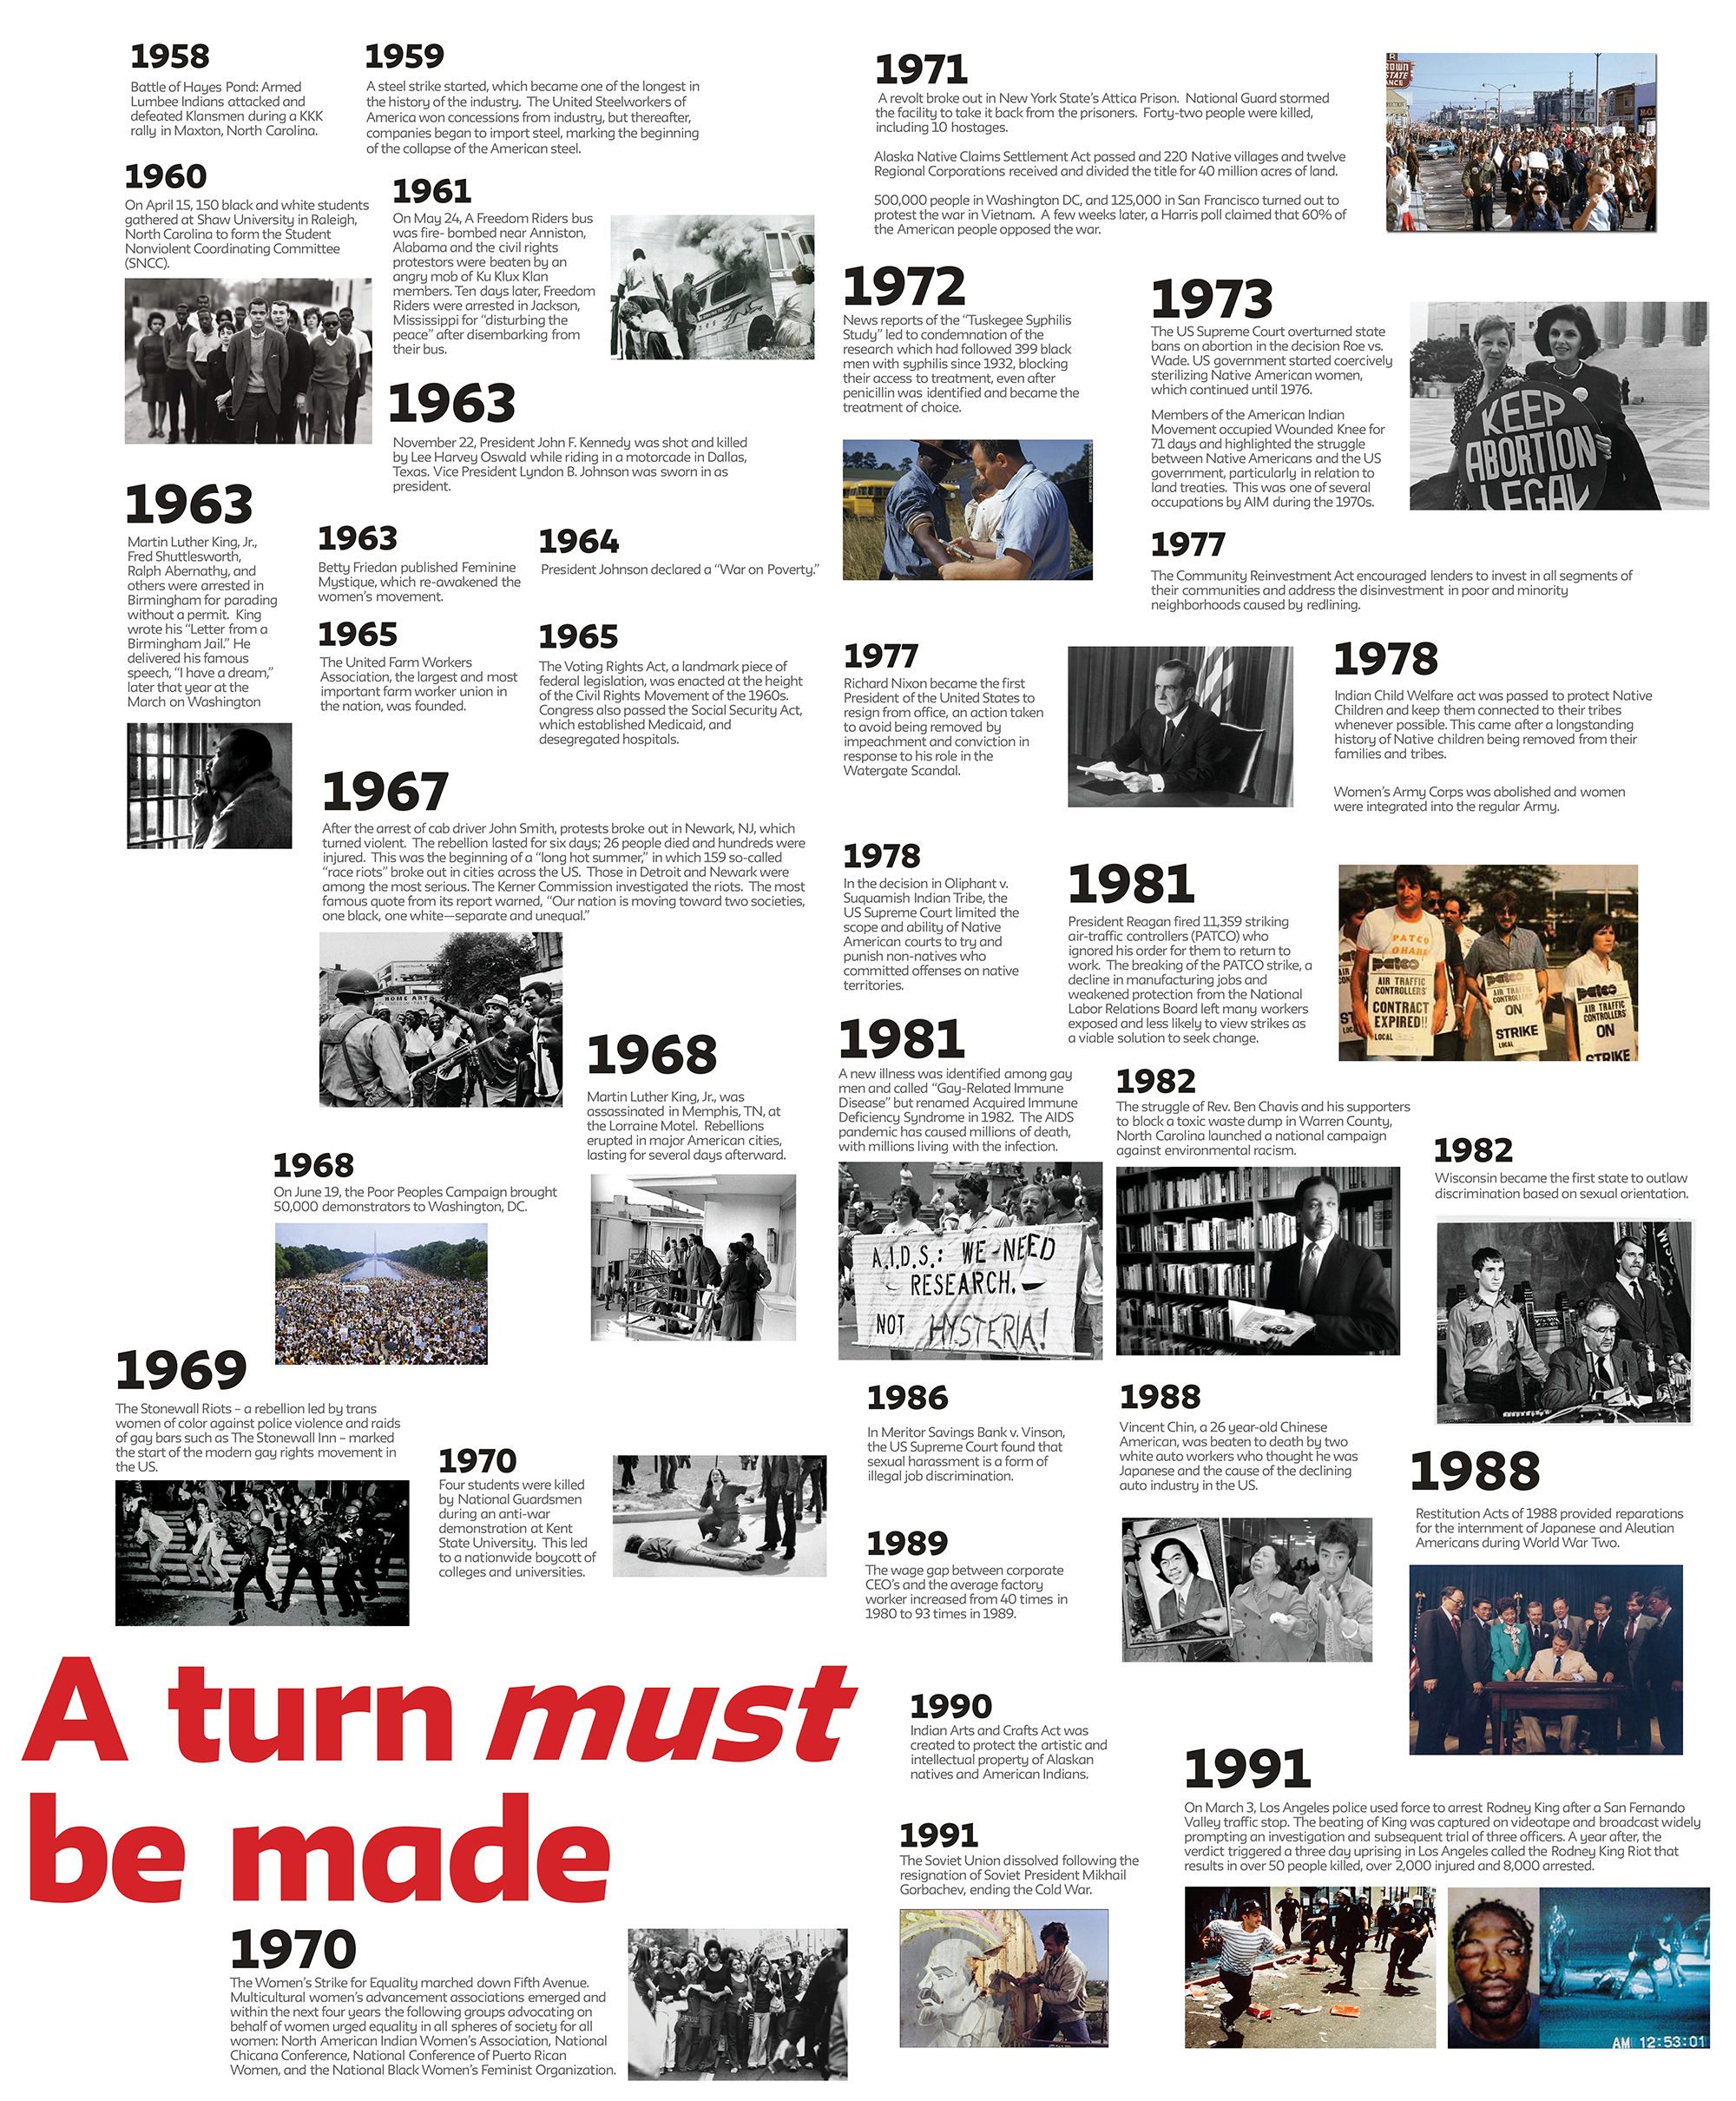 400 Years Of Inequality Timeline, dates 1958-1991